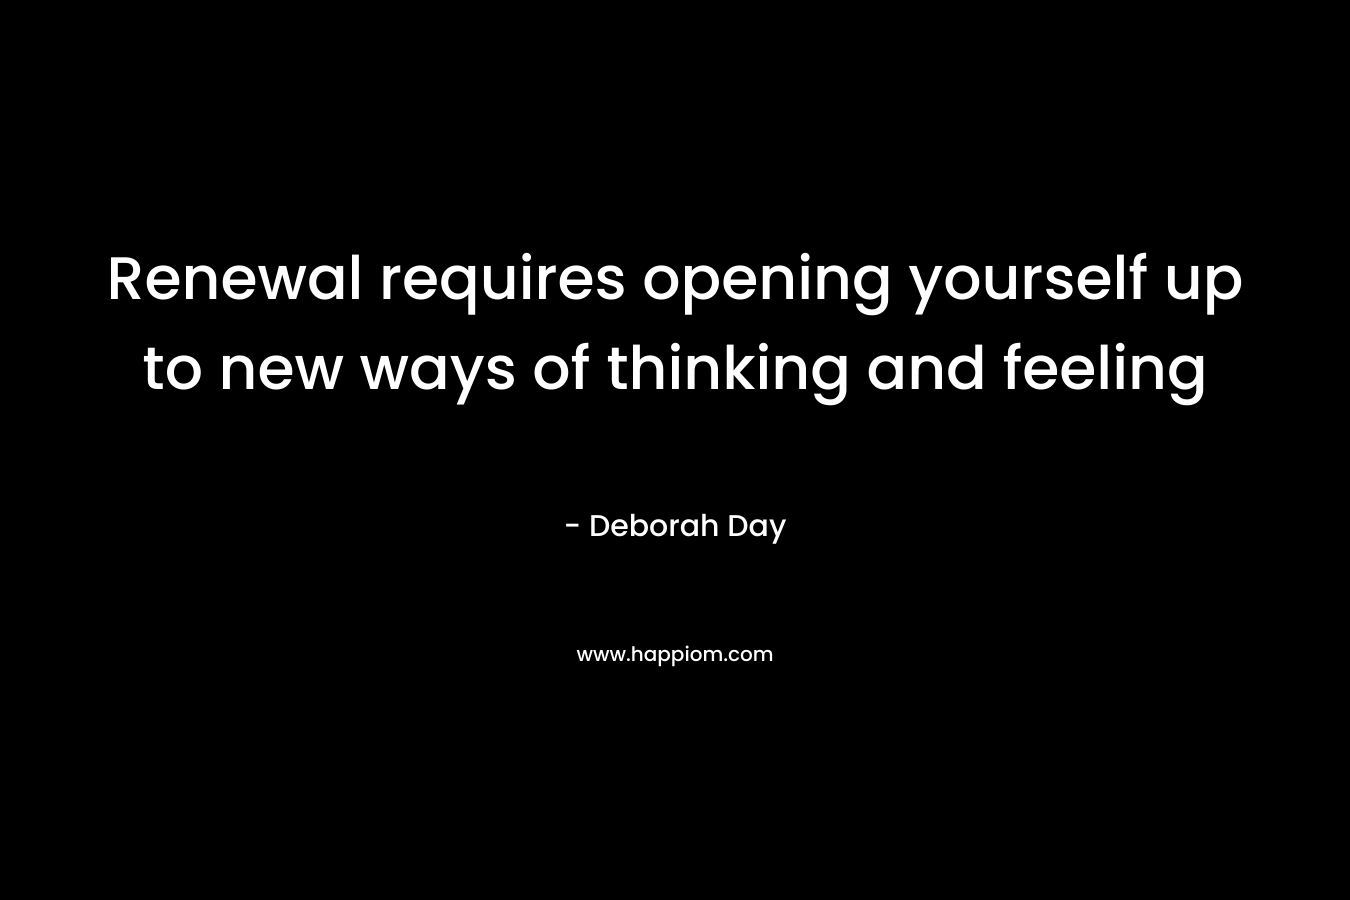 Renewal requires opening yourself up to new ways of thinking and feeling